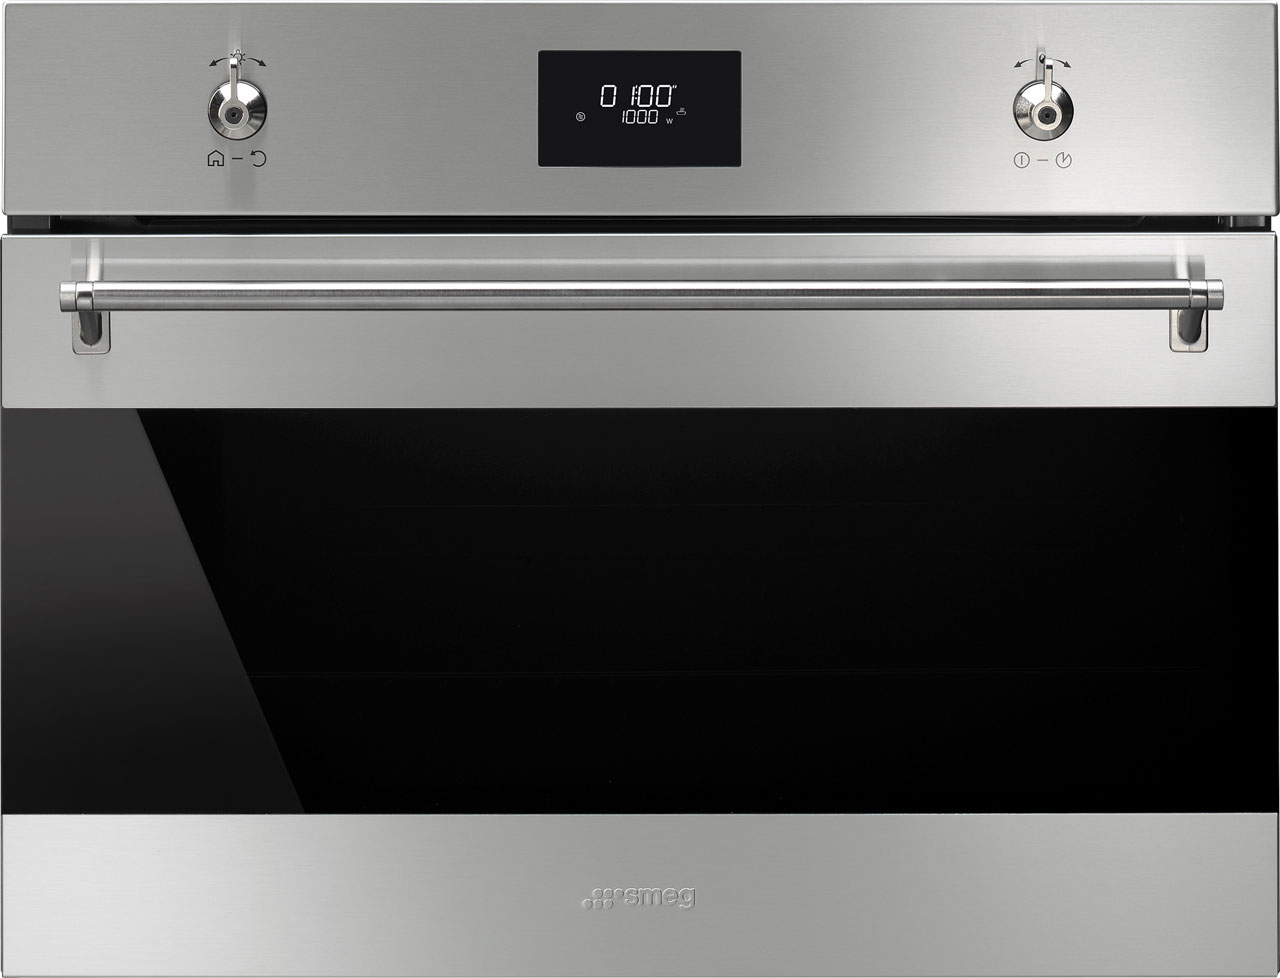 Compact Oven cleaned by Ultra Clean Ovens - "50